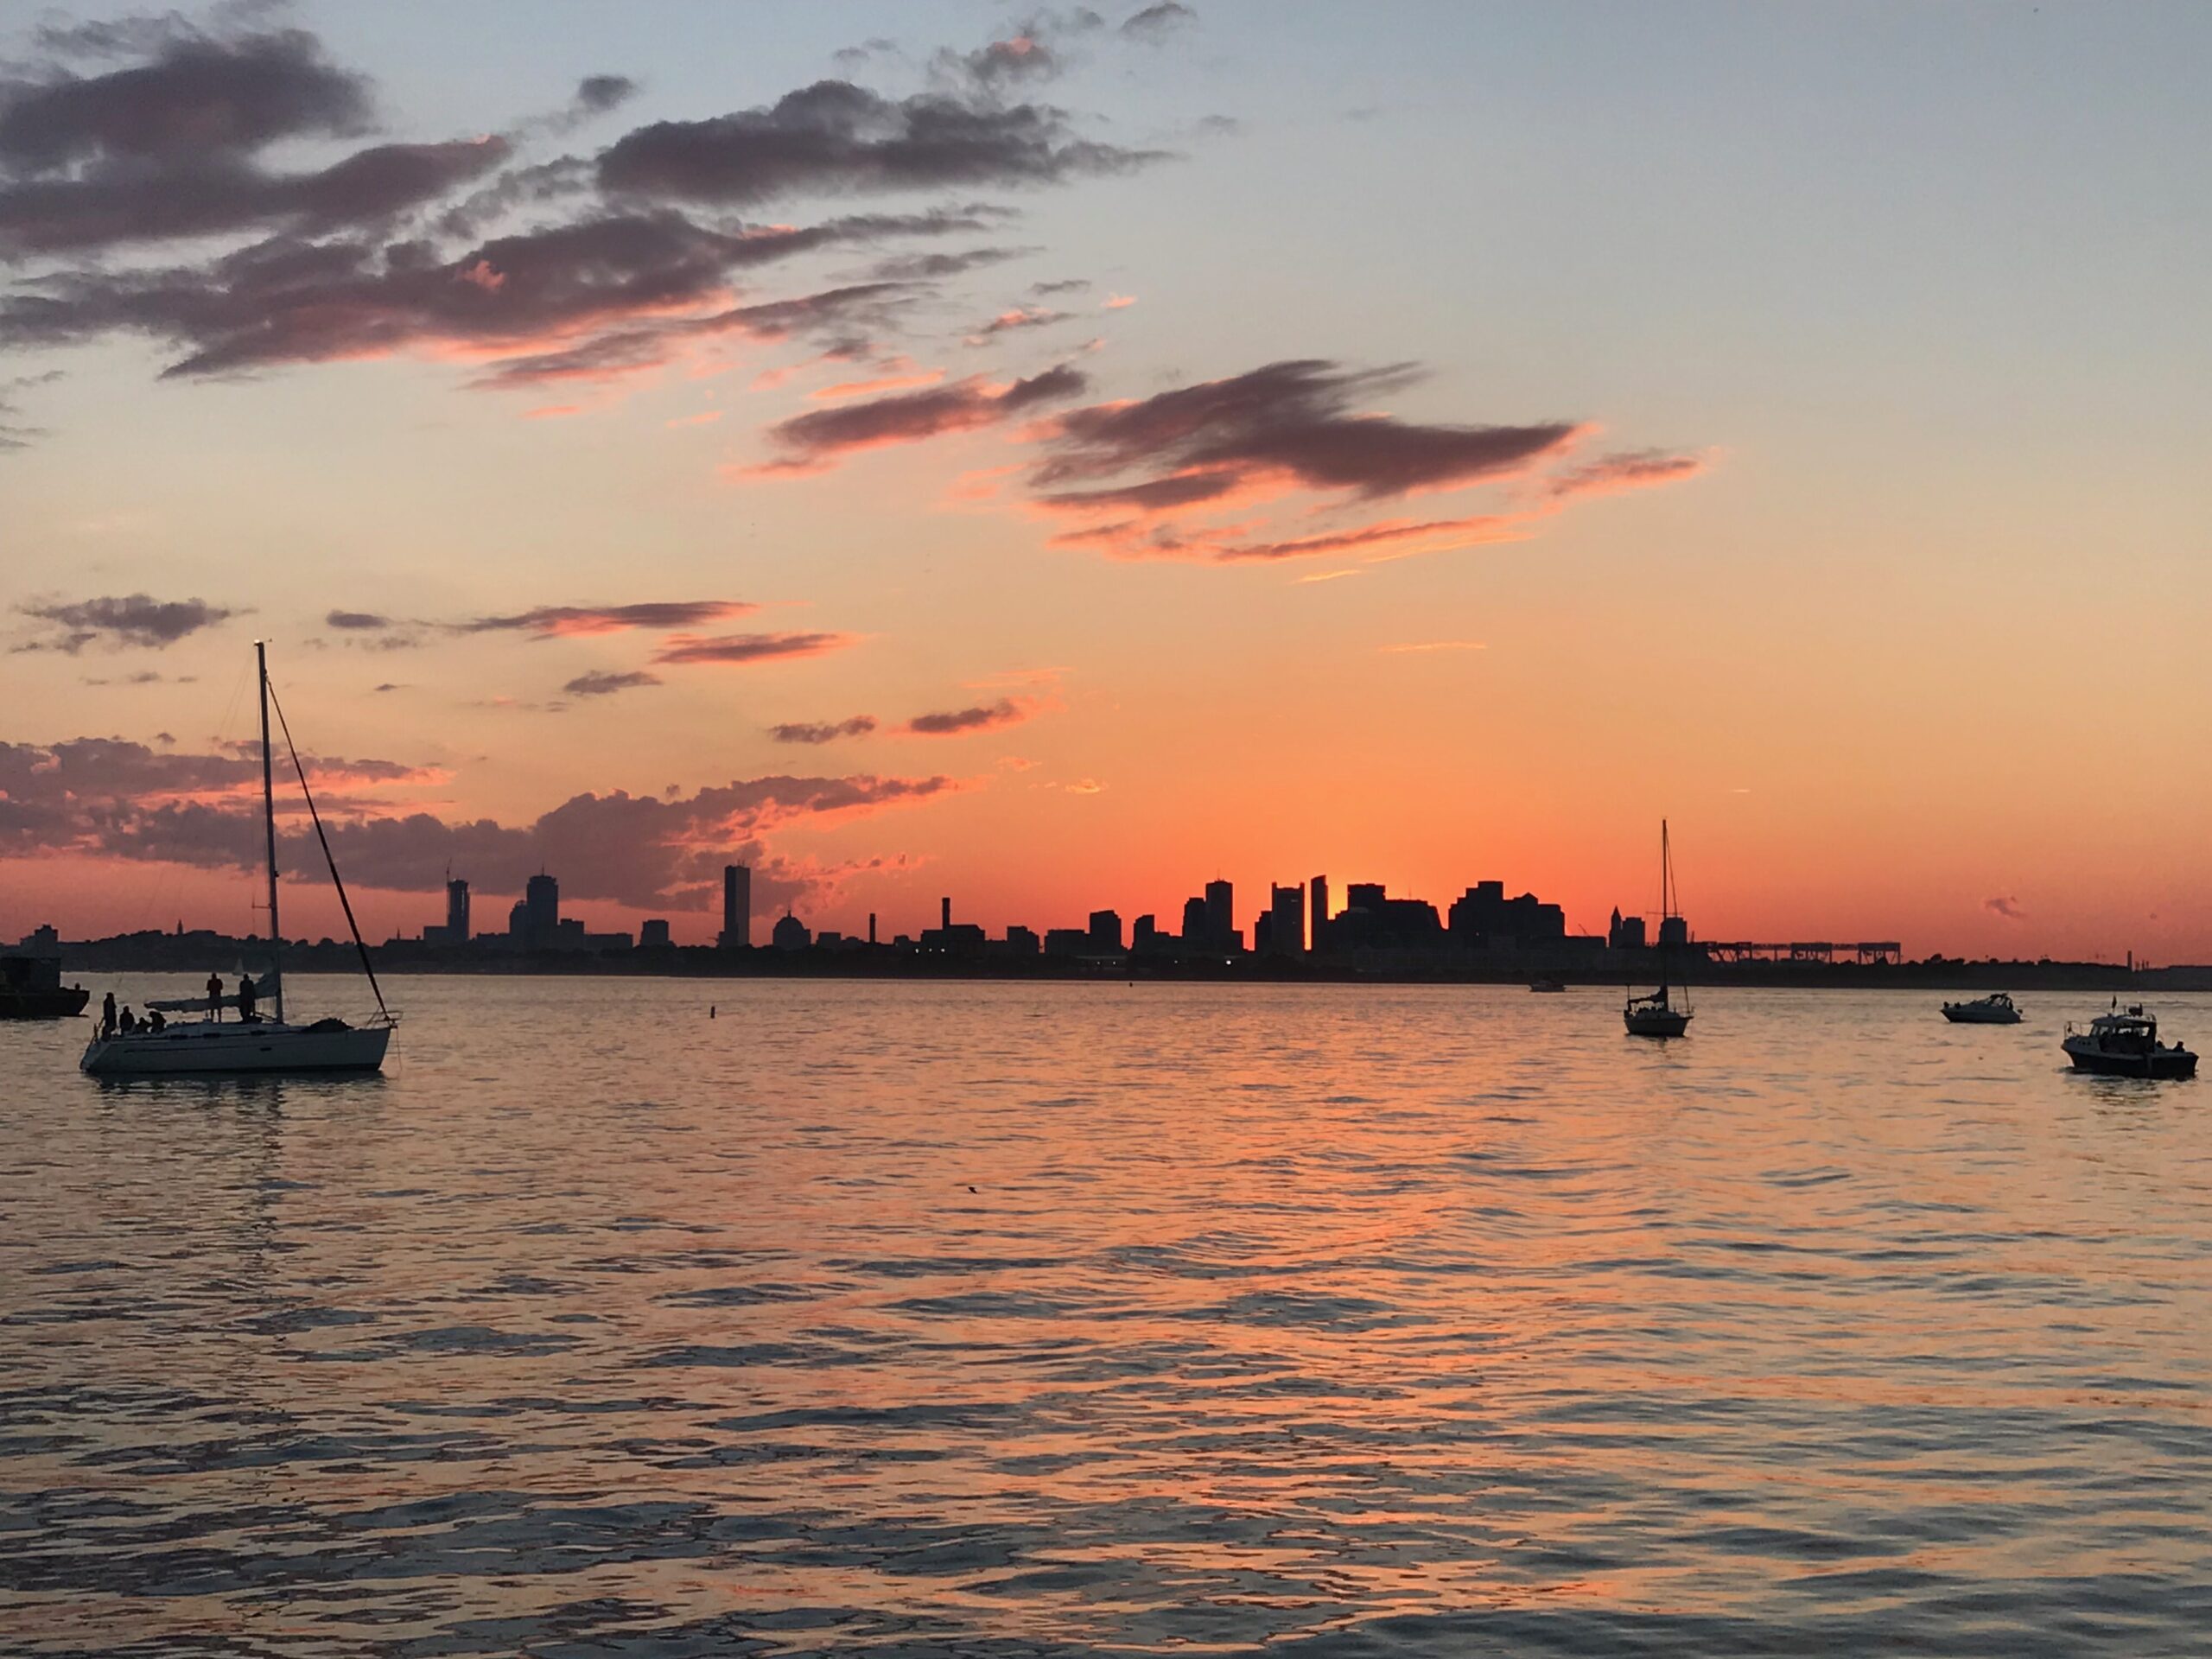 Sunset from Spectacle Island, with a view of the Boston skyline